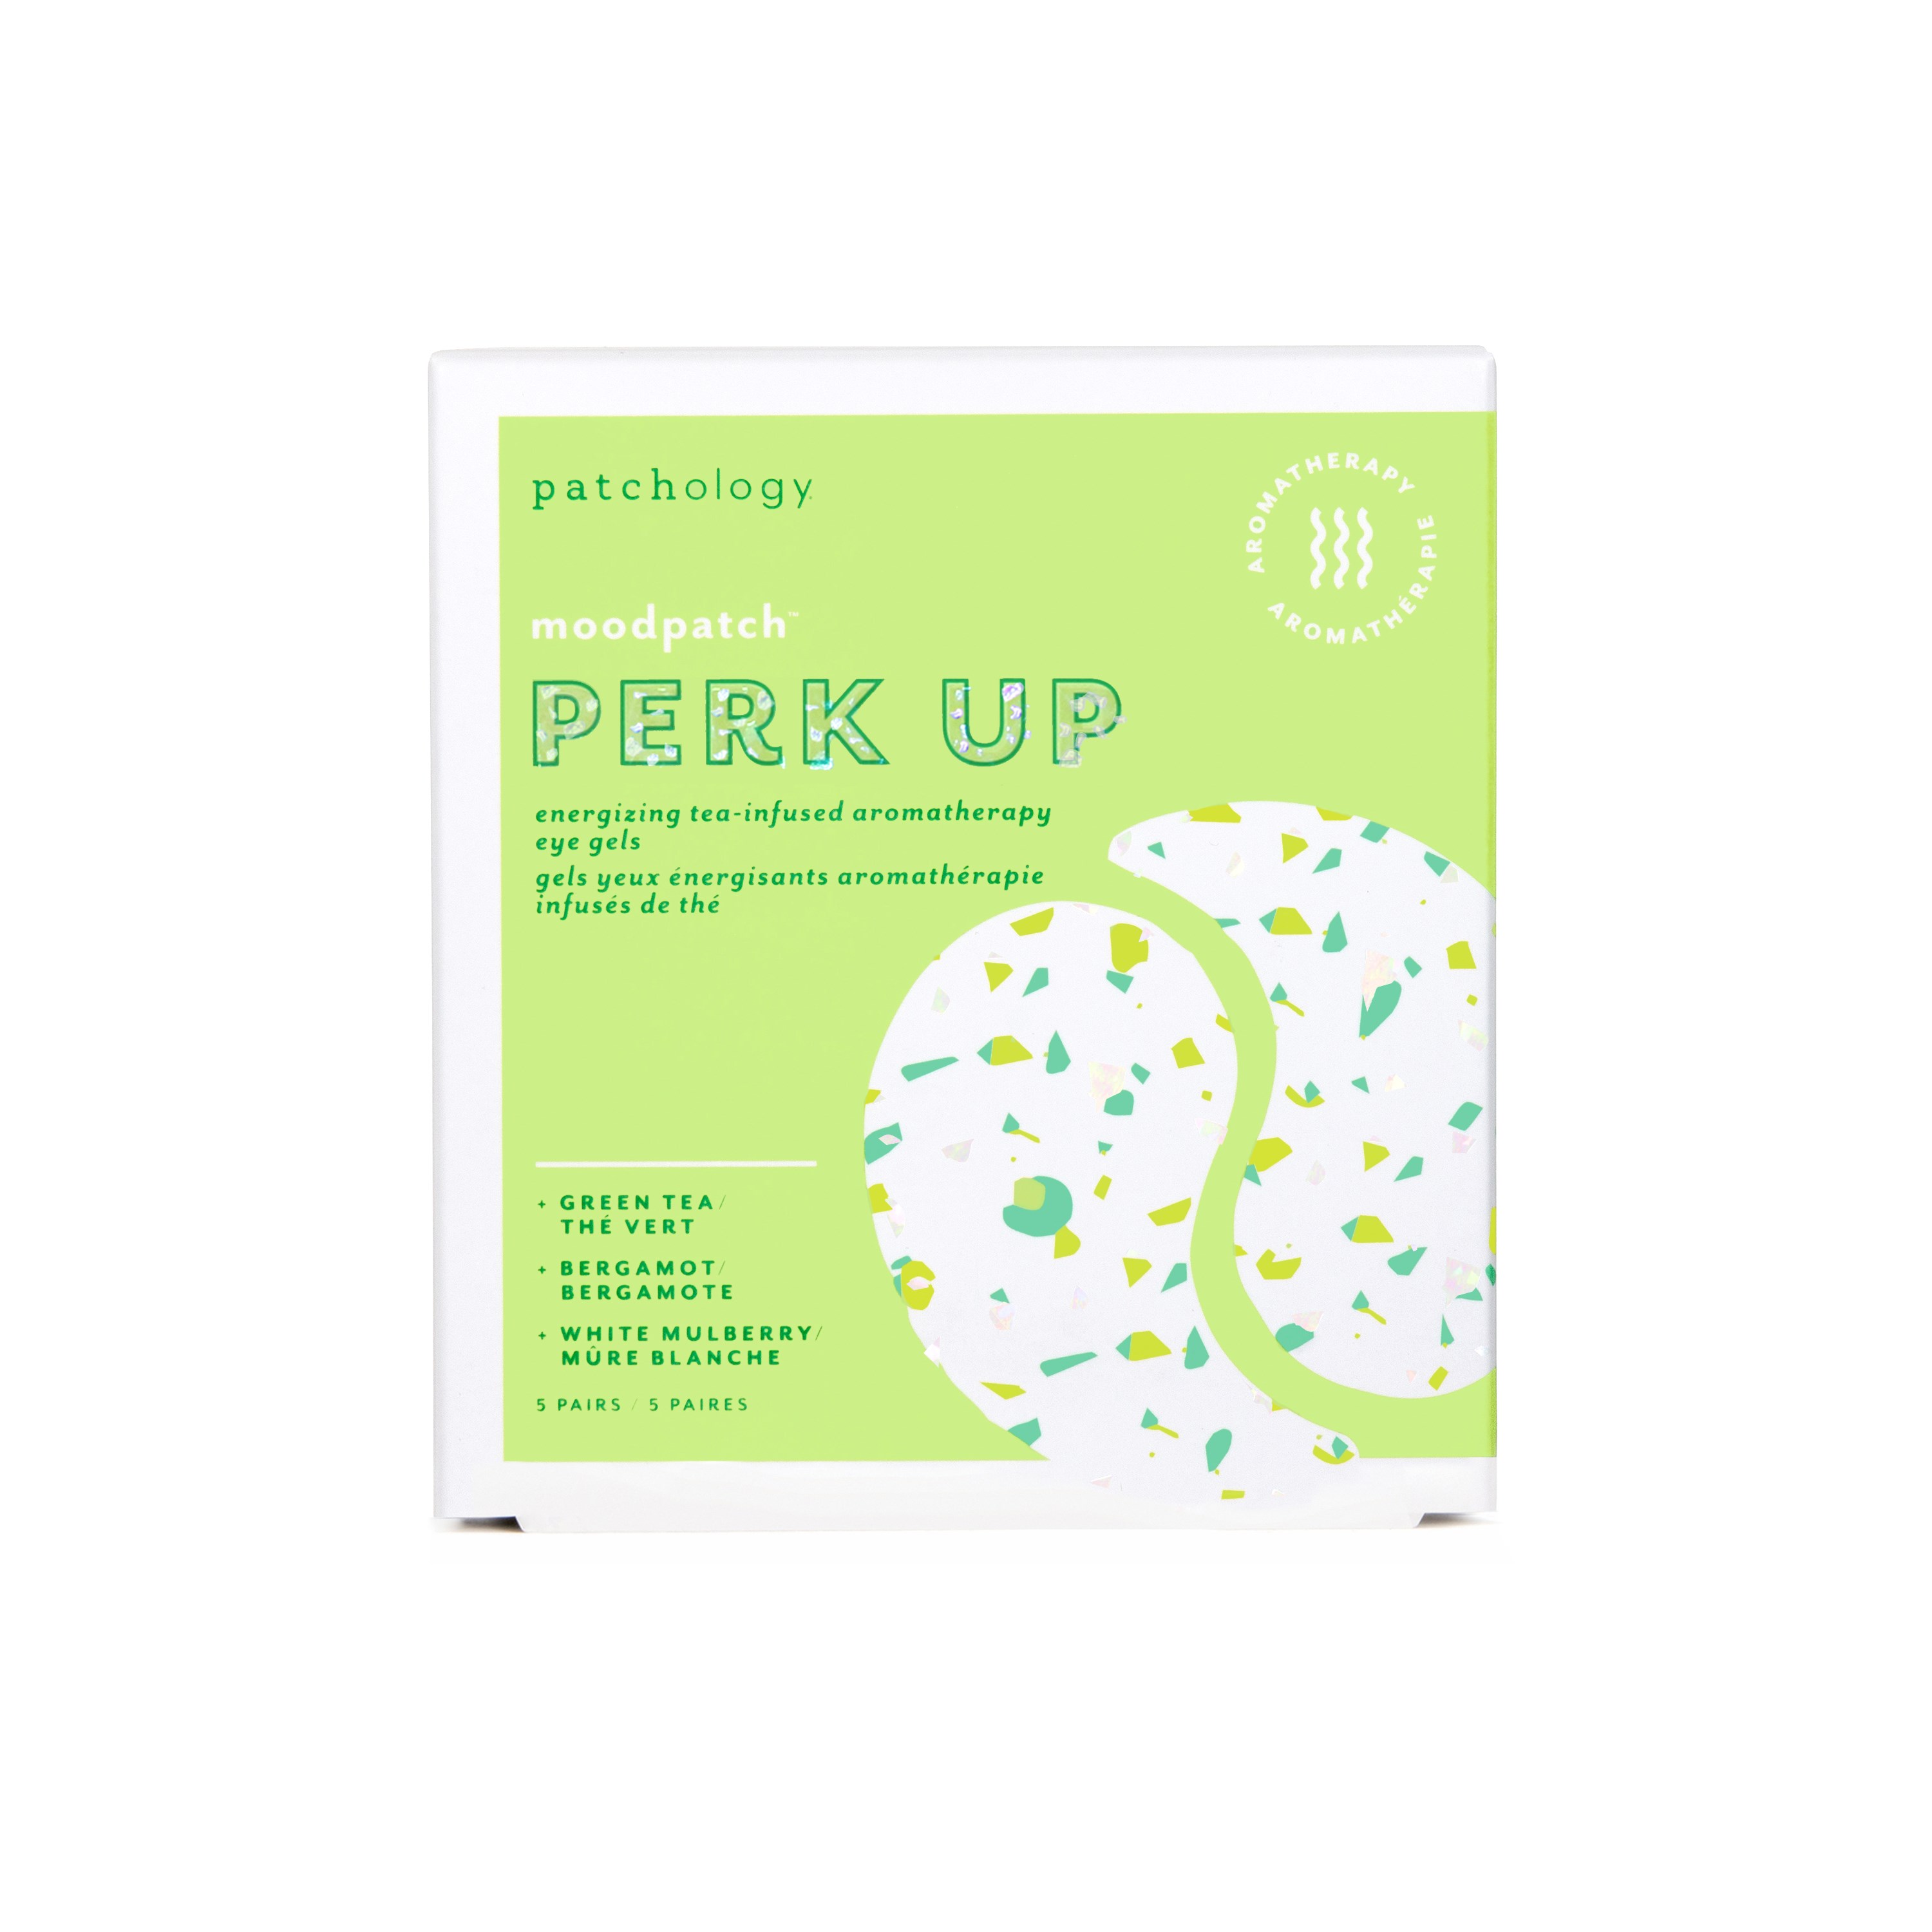 Patchology Moodpatch Perk Up Eye Gels 5 Pairs/Box